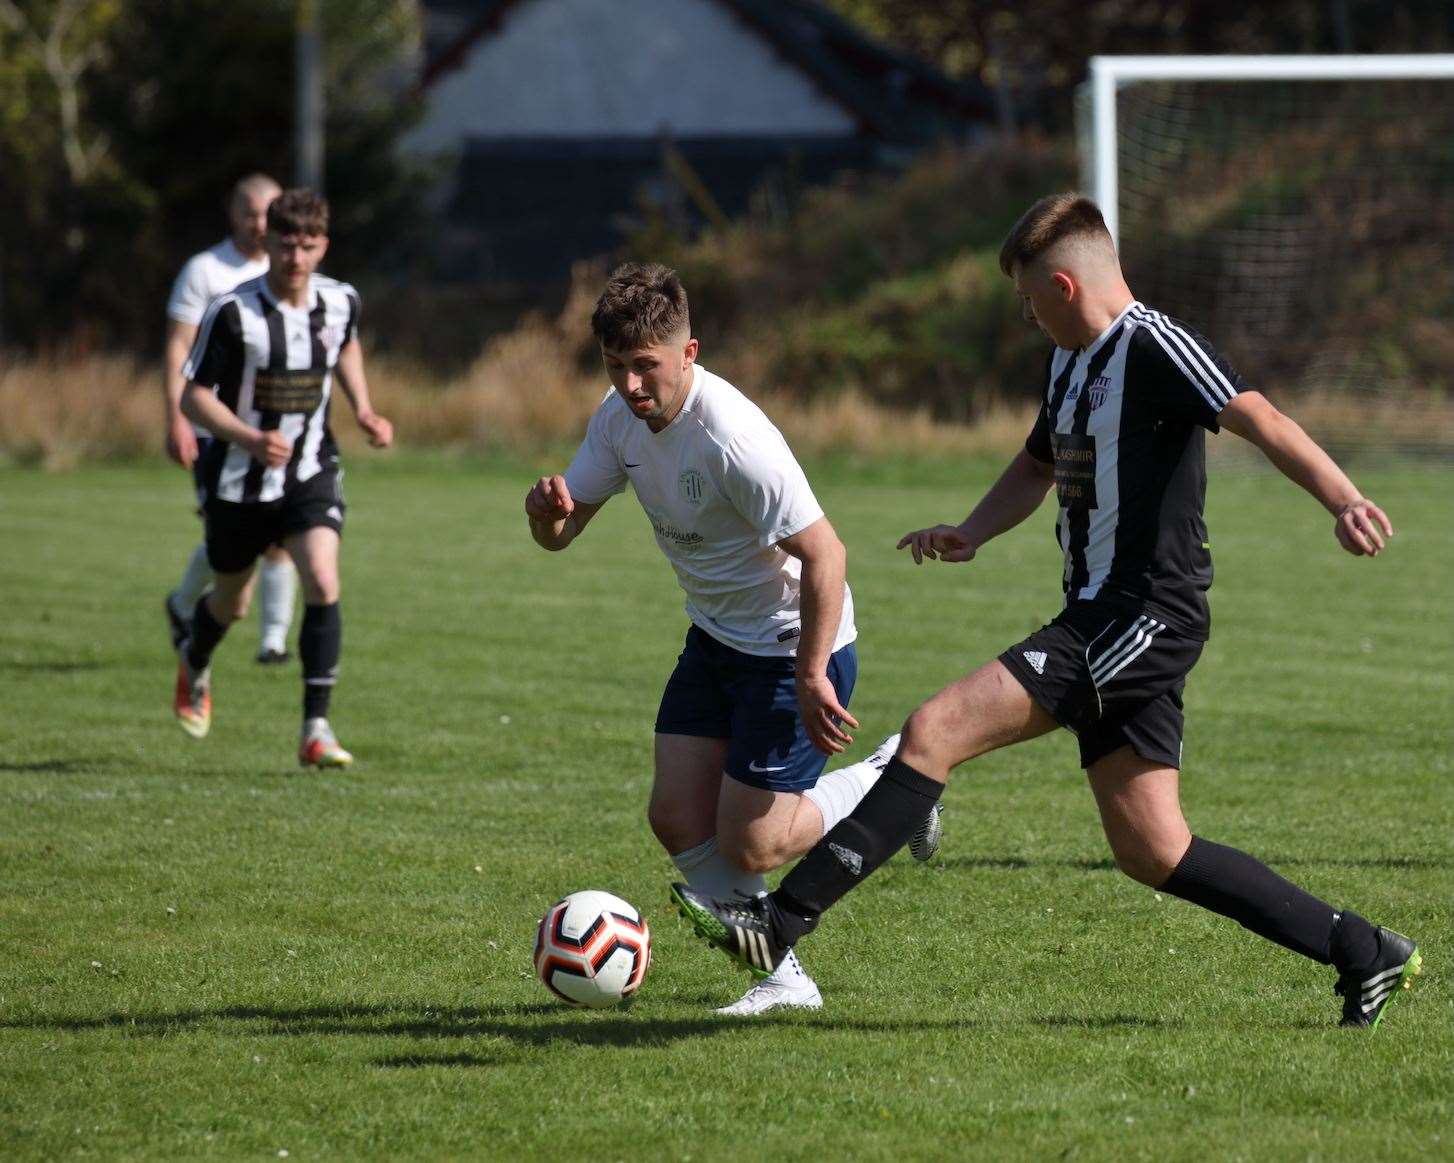 Lochinver take on High Ormlie Hotspurs. Photo: David Haines